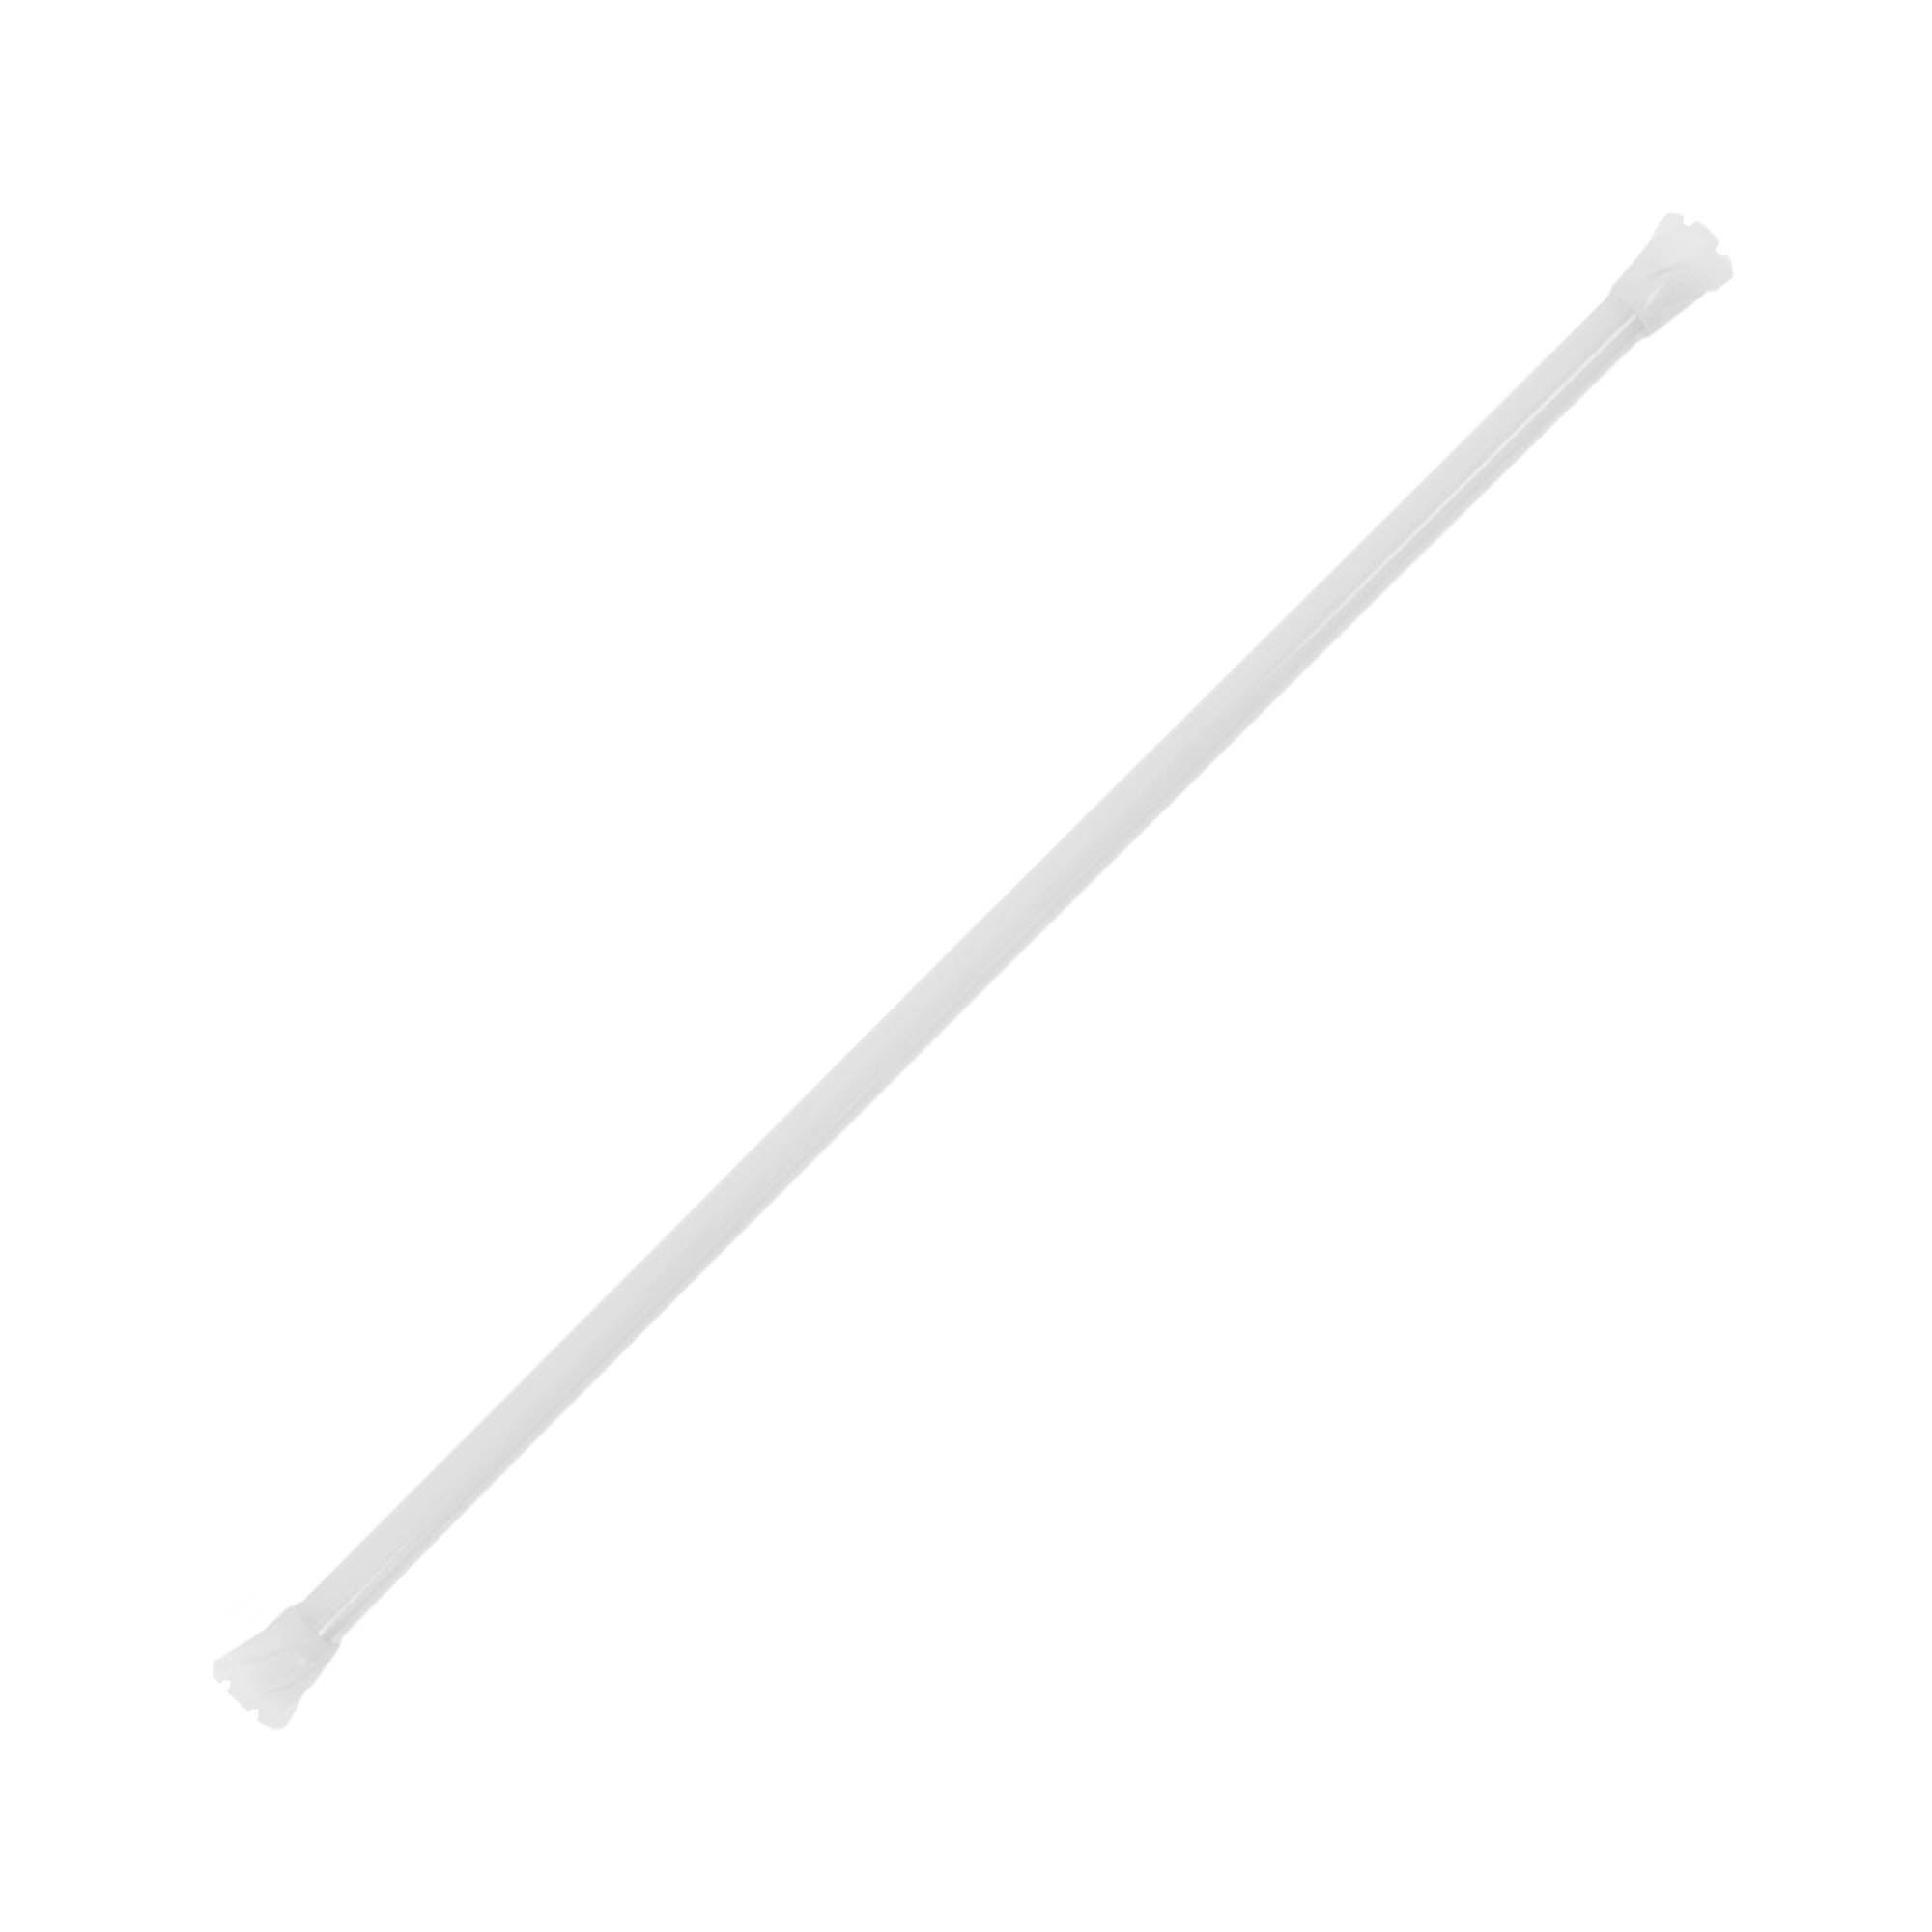 Echo spin staff 100cm on a white background